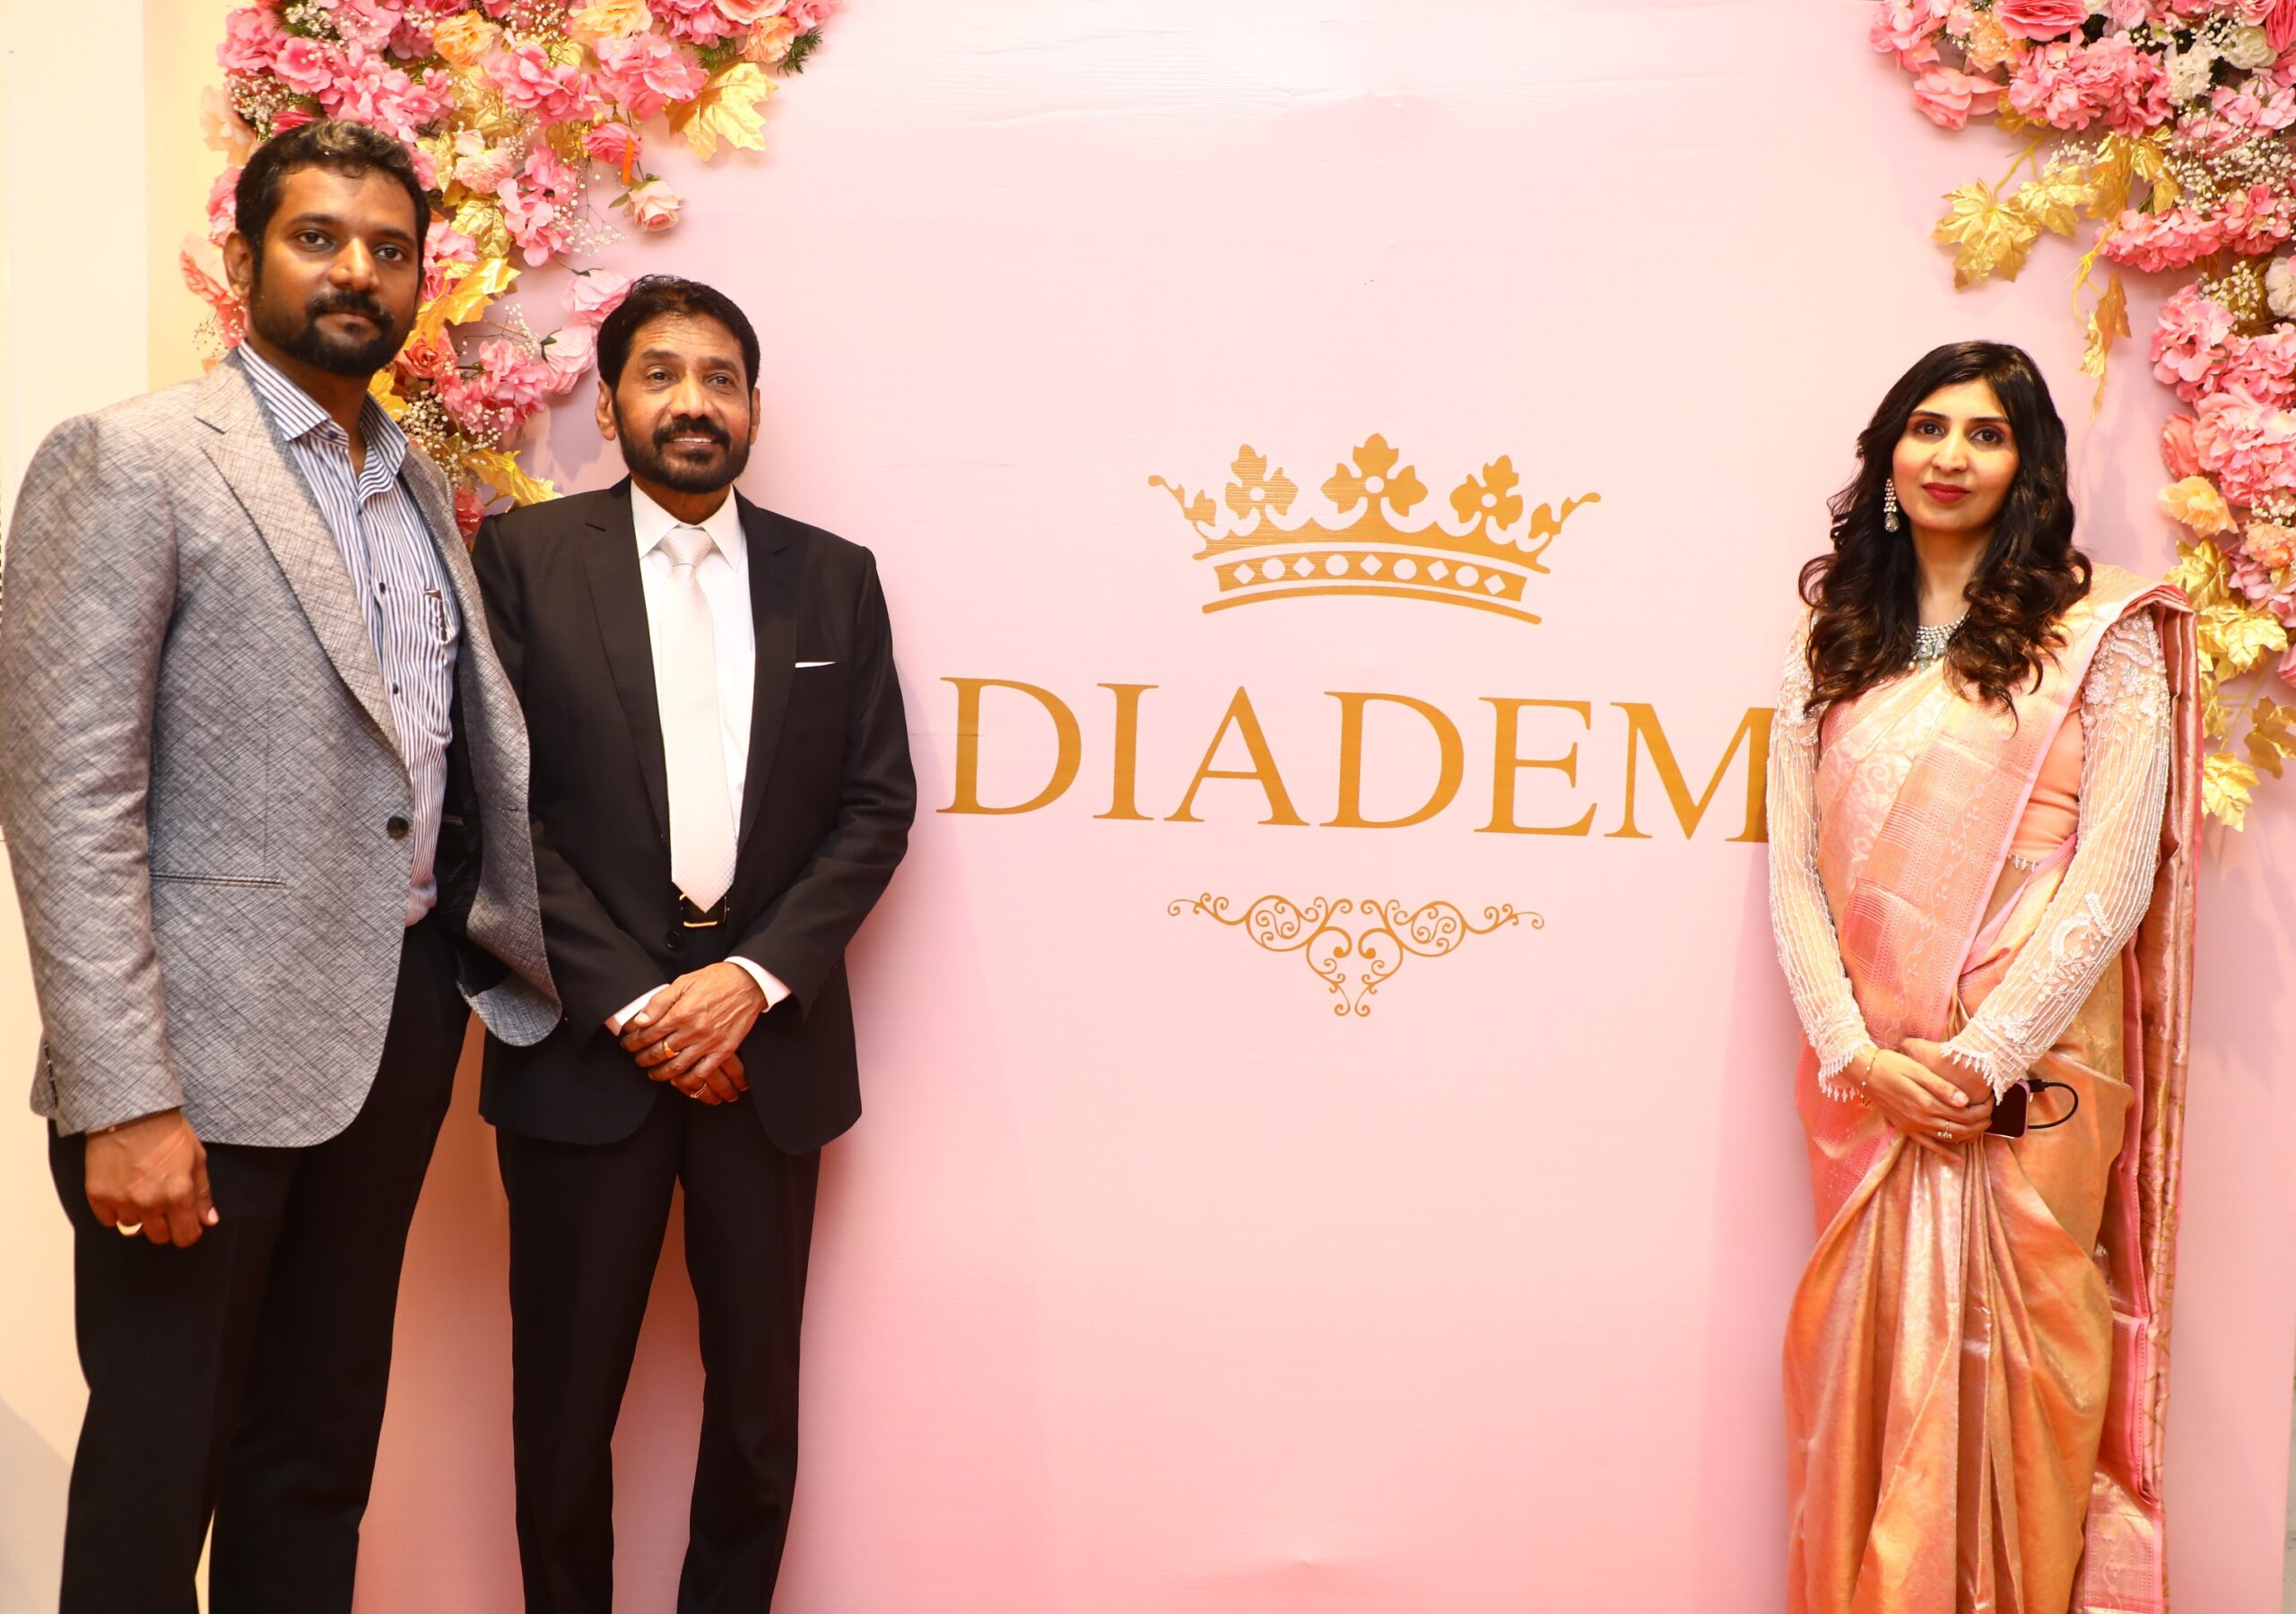 Diadem launches its new flagship store with a new Vibrant